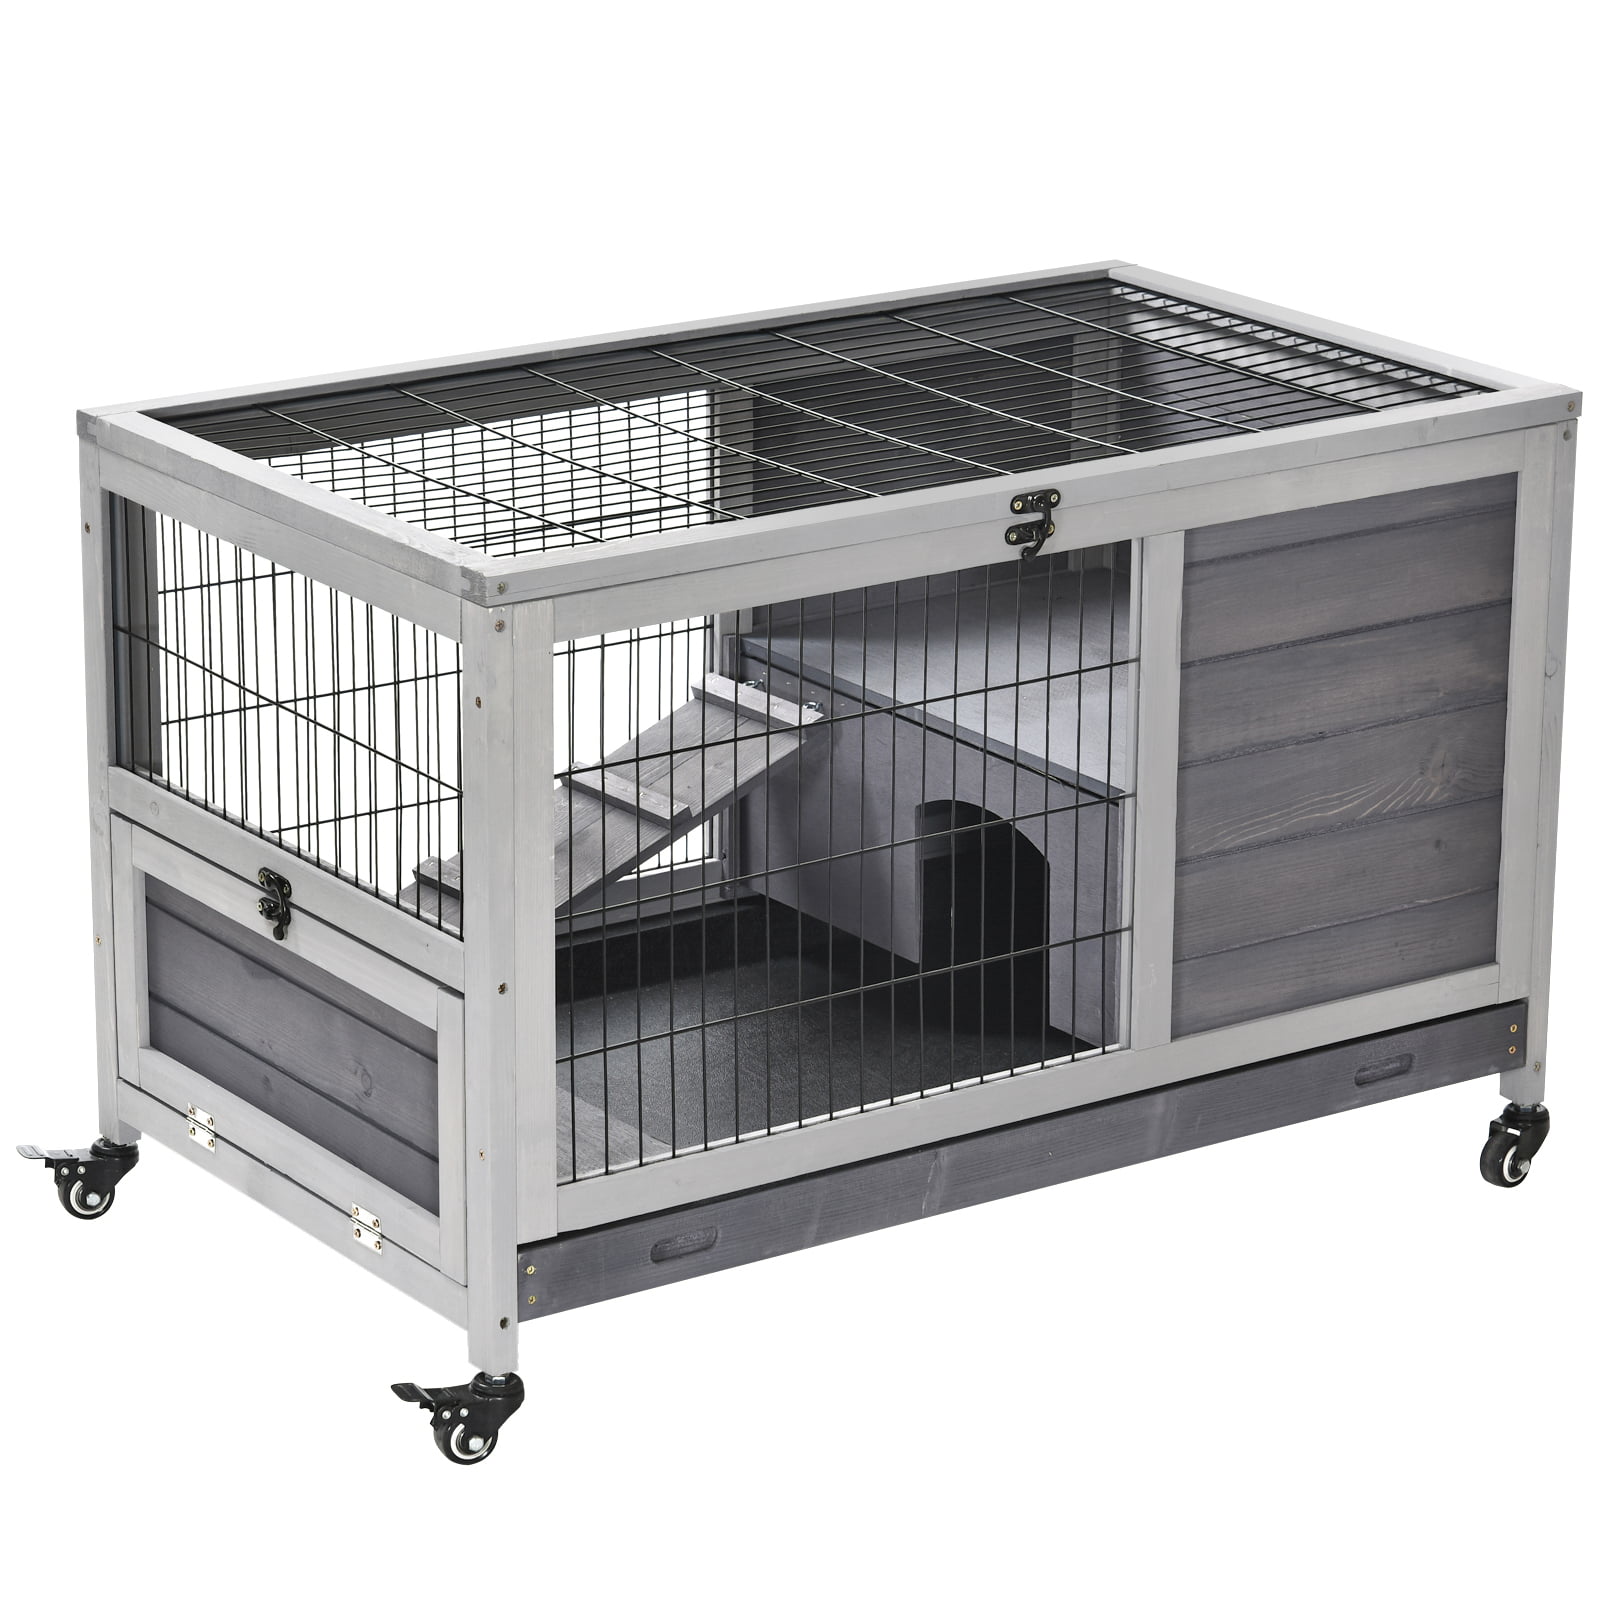 Pawhut Wooden Indoor Rabbit Hutch Elevated Cage Habitat with Enclosed Run with Wheels, Ideal for Rabbits and Guinea Pigs